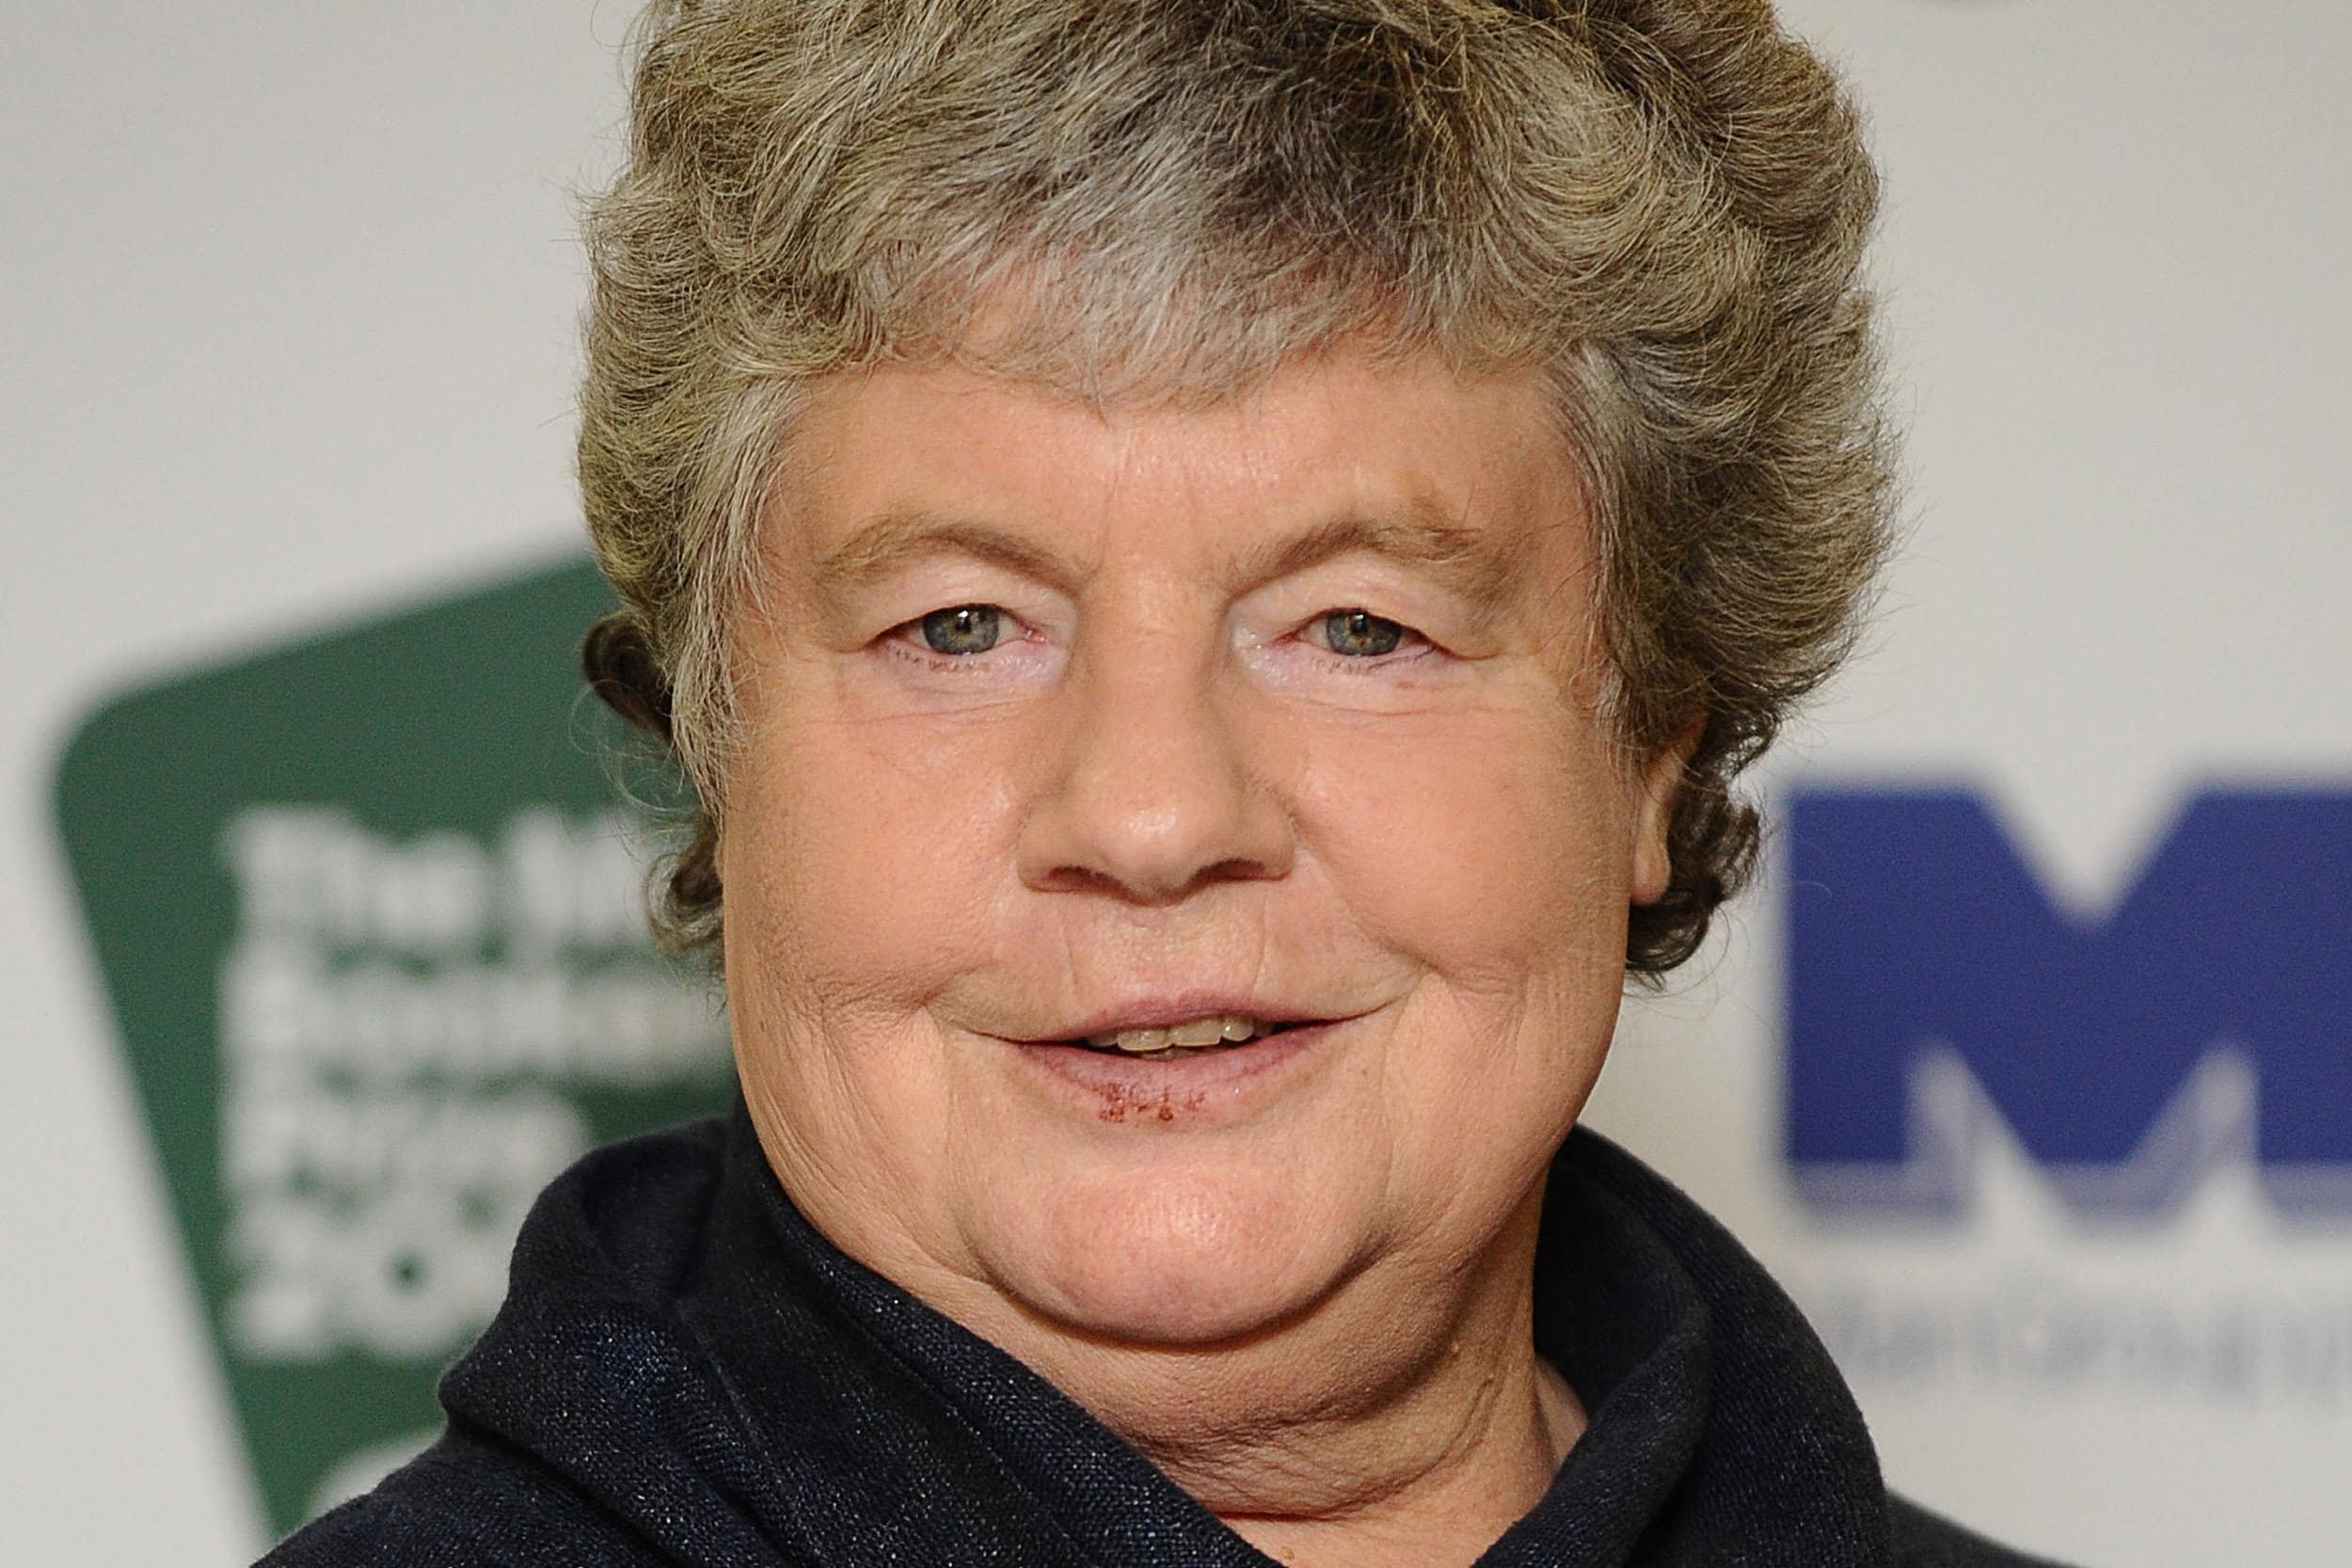 AS Byatt was made Dame Commander of the Order of the British Empire (DBE) in 1999